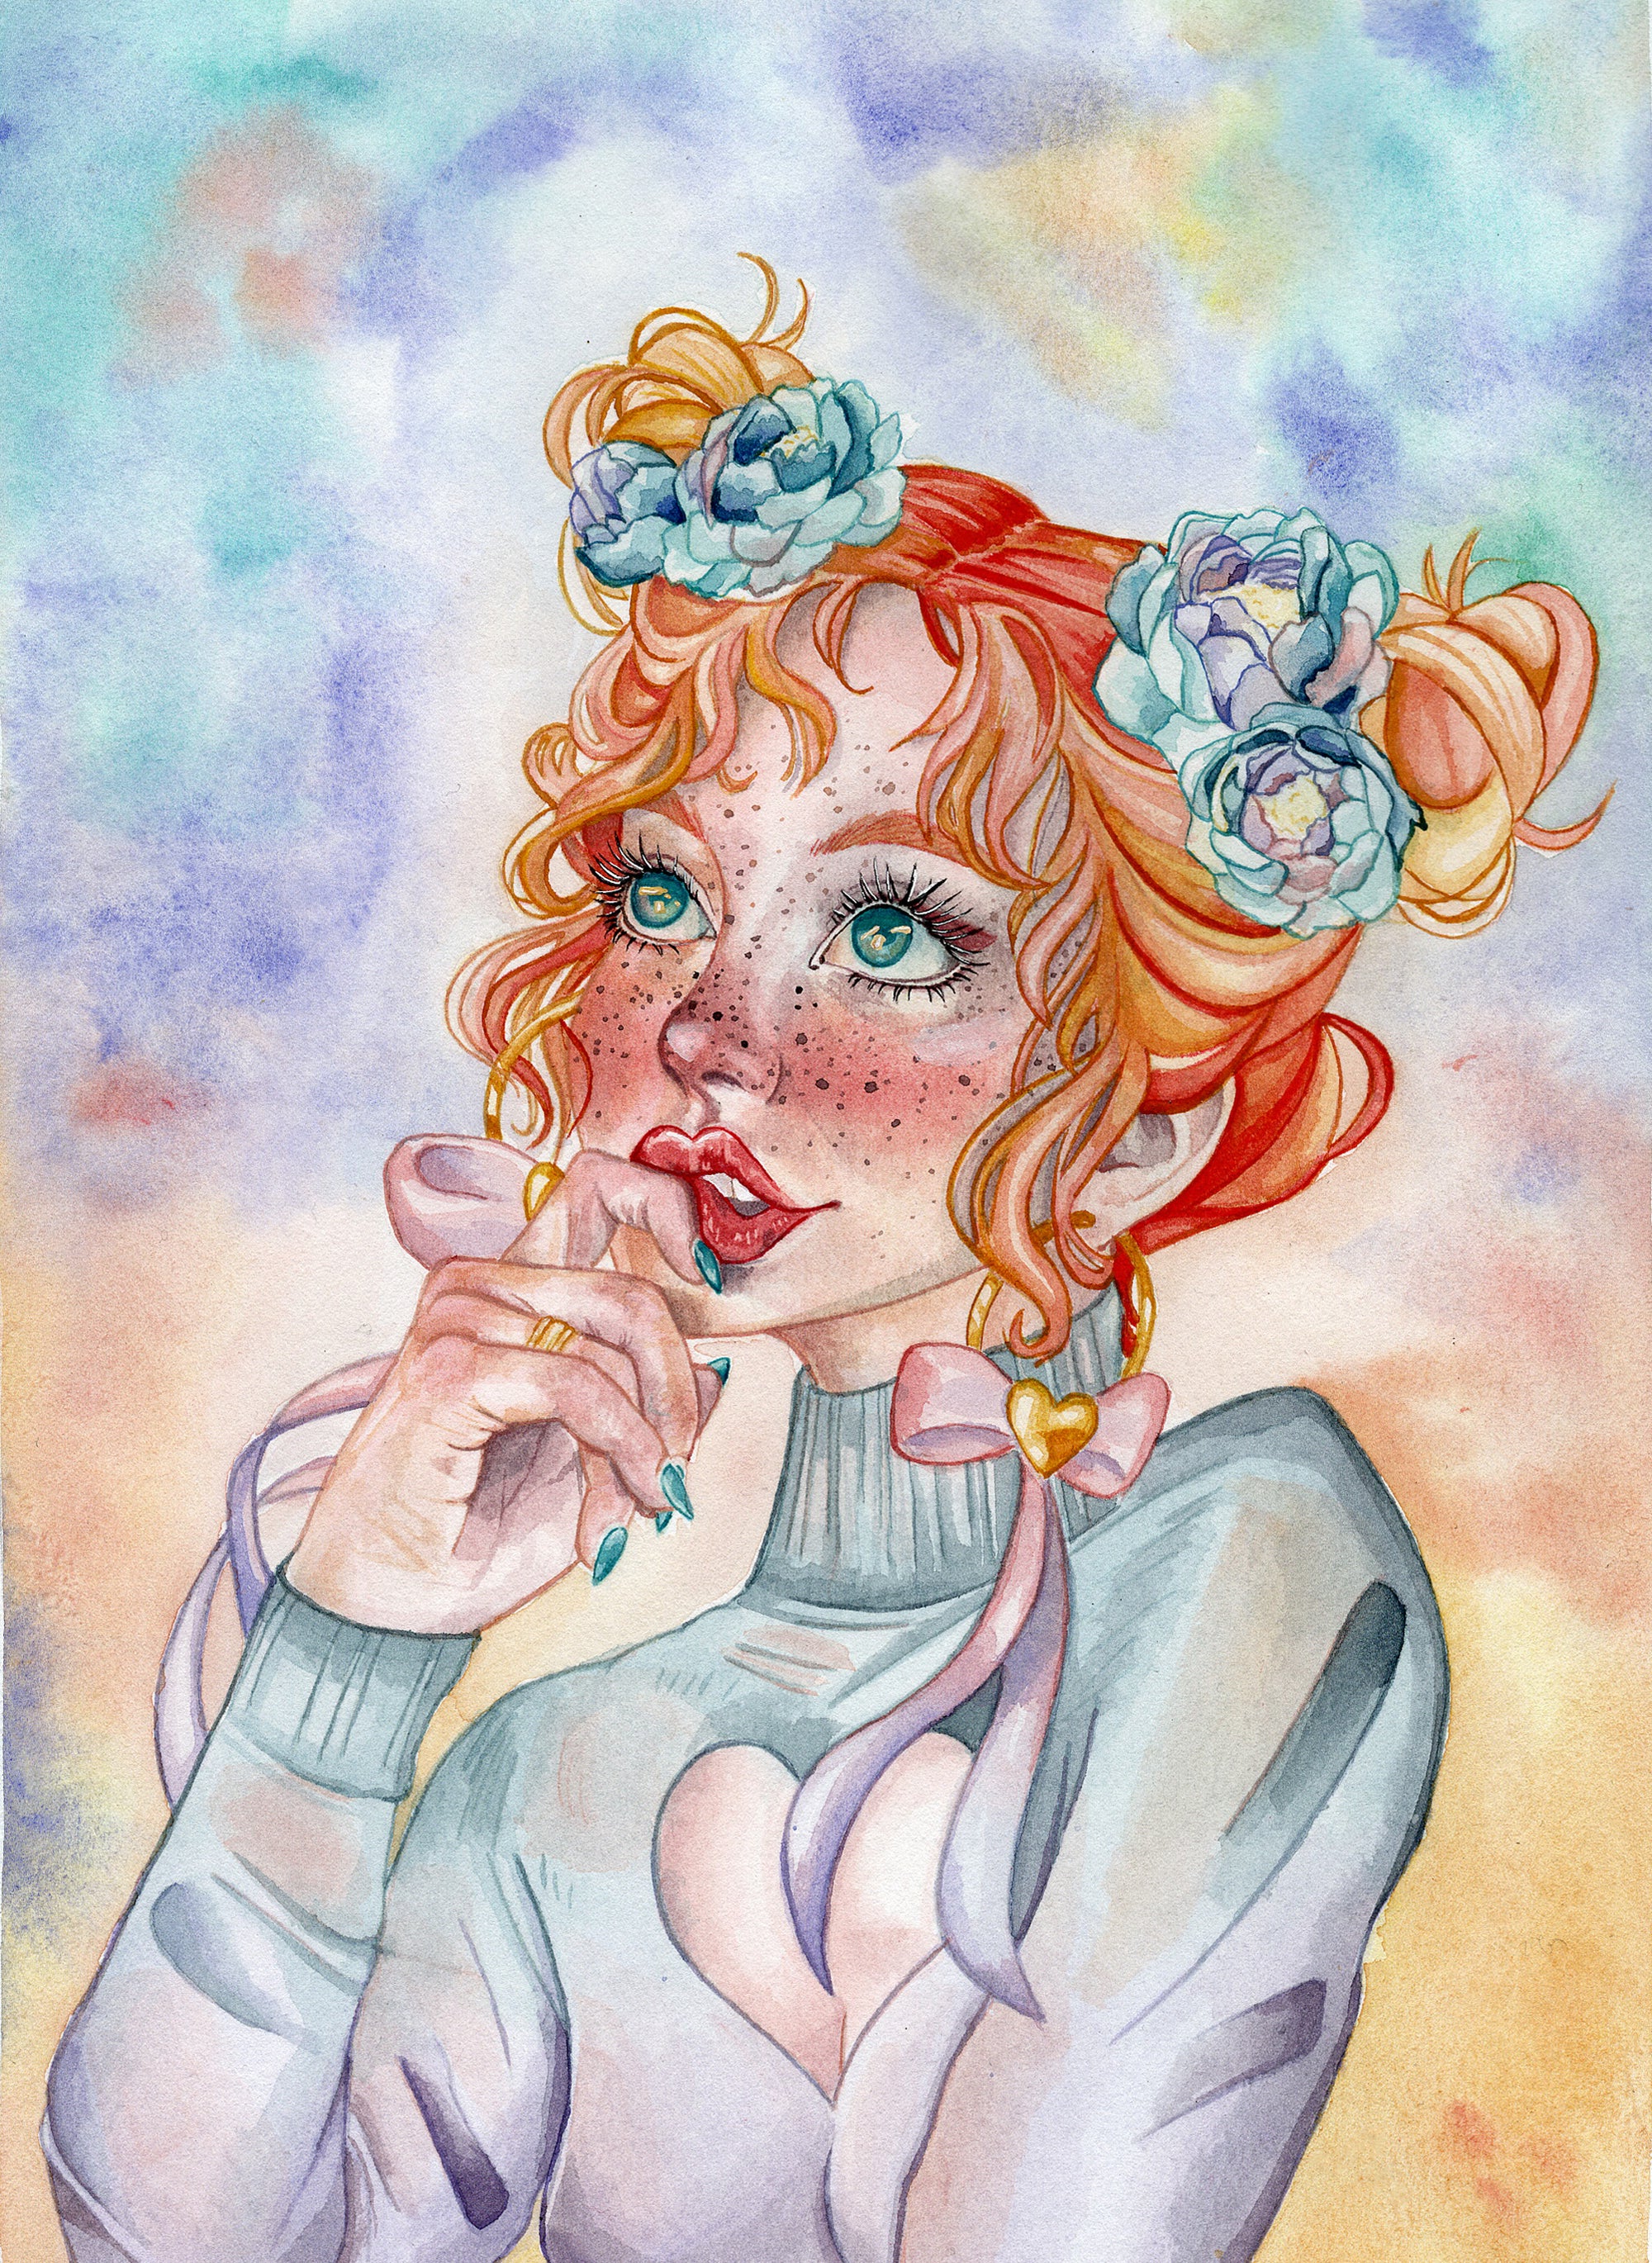 Watercolor painting of a redhead. Her hair is put in two buns at the top of her head with flowers around them. She's wearing a blue and purple turtleneck sweater with a heart cutout over the chest.